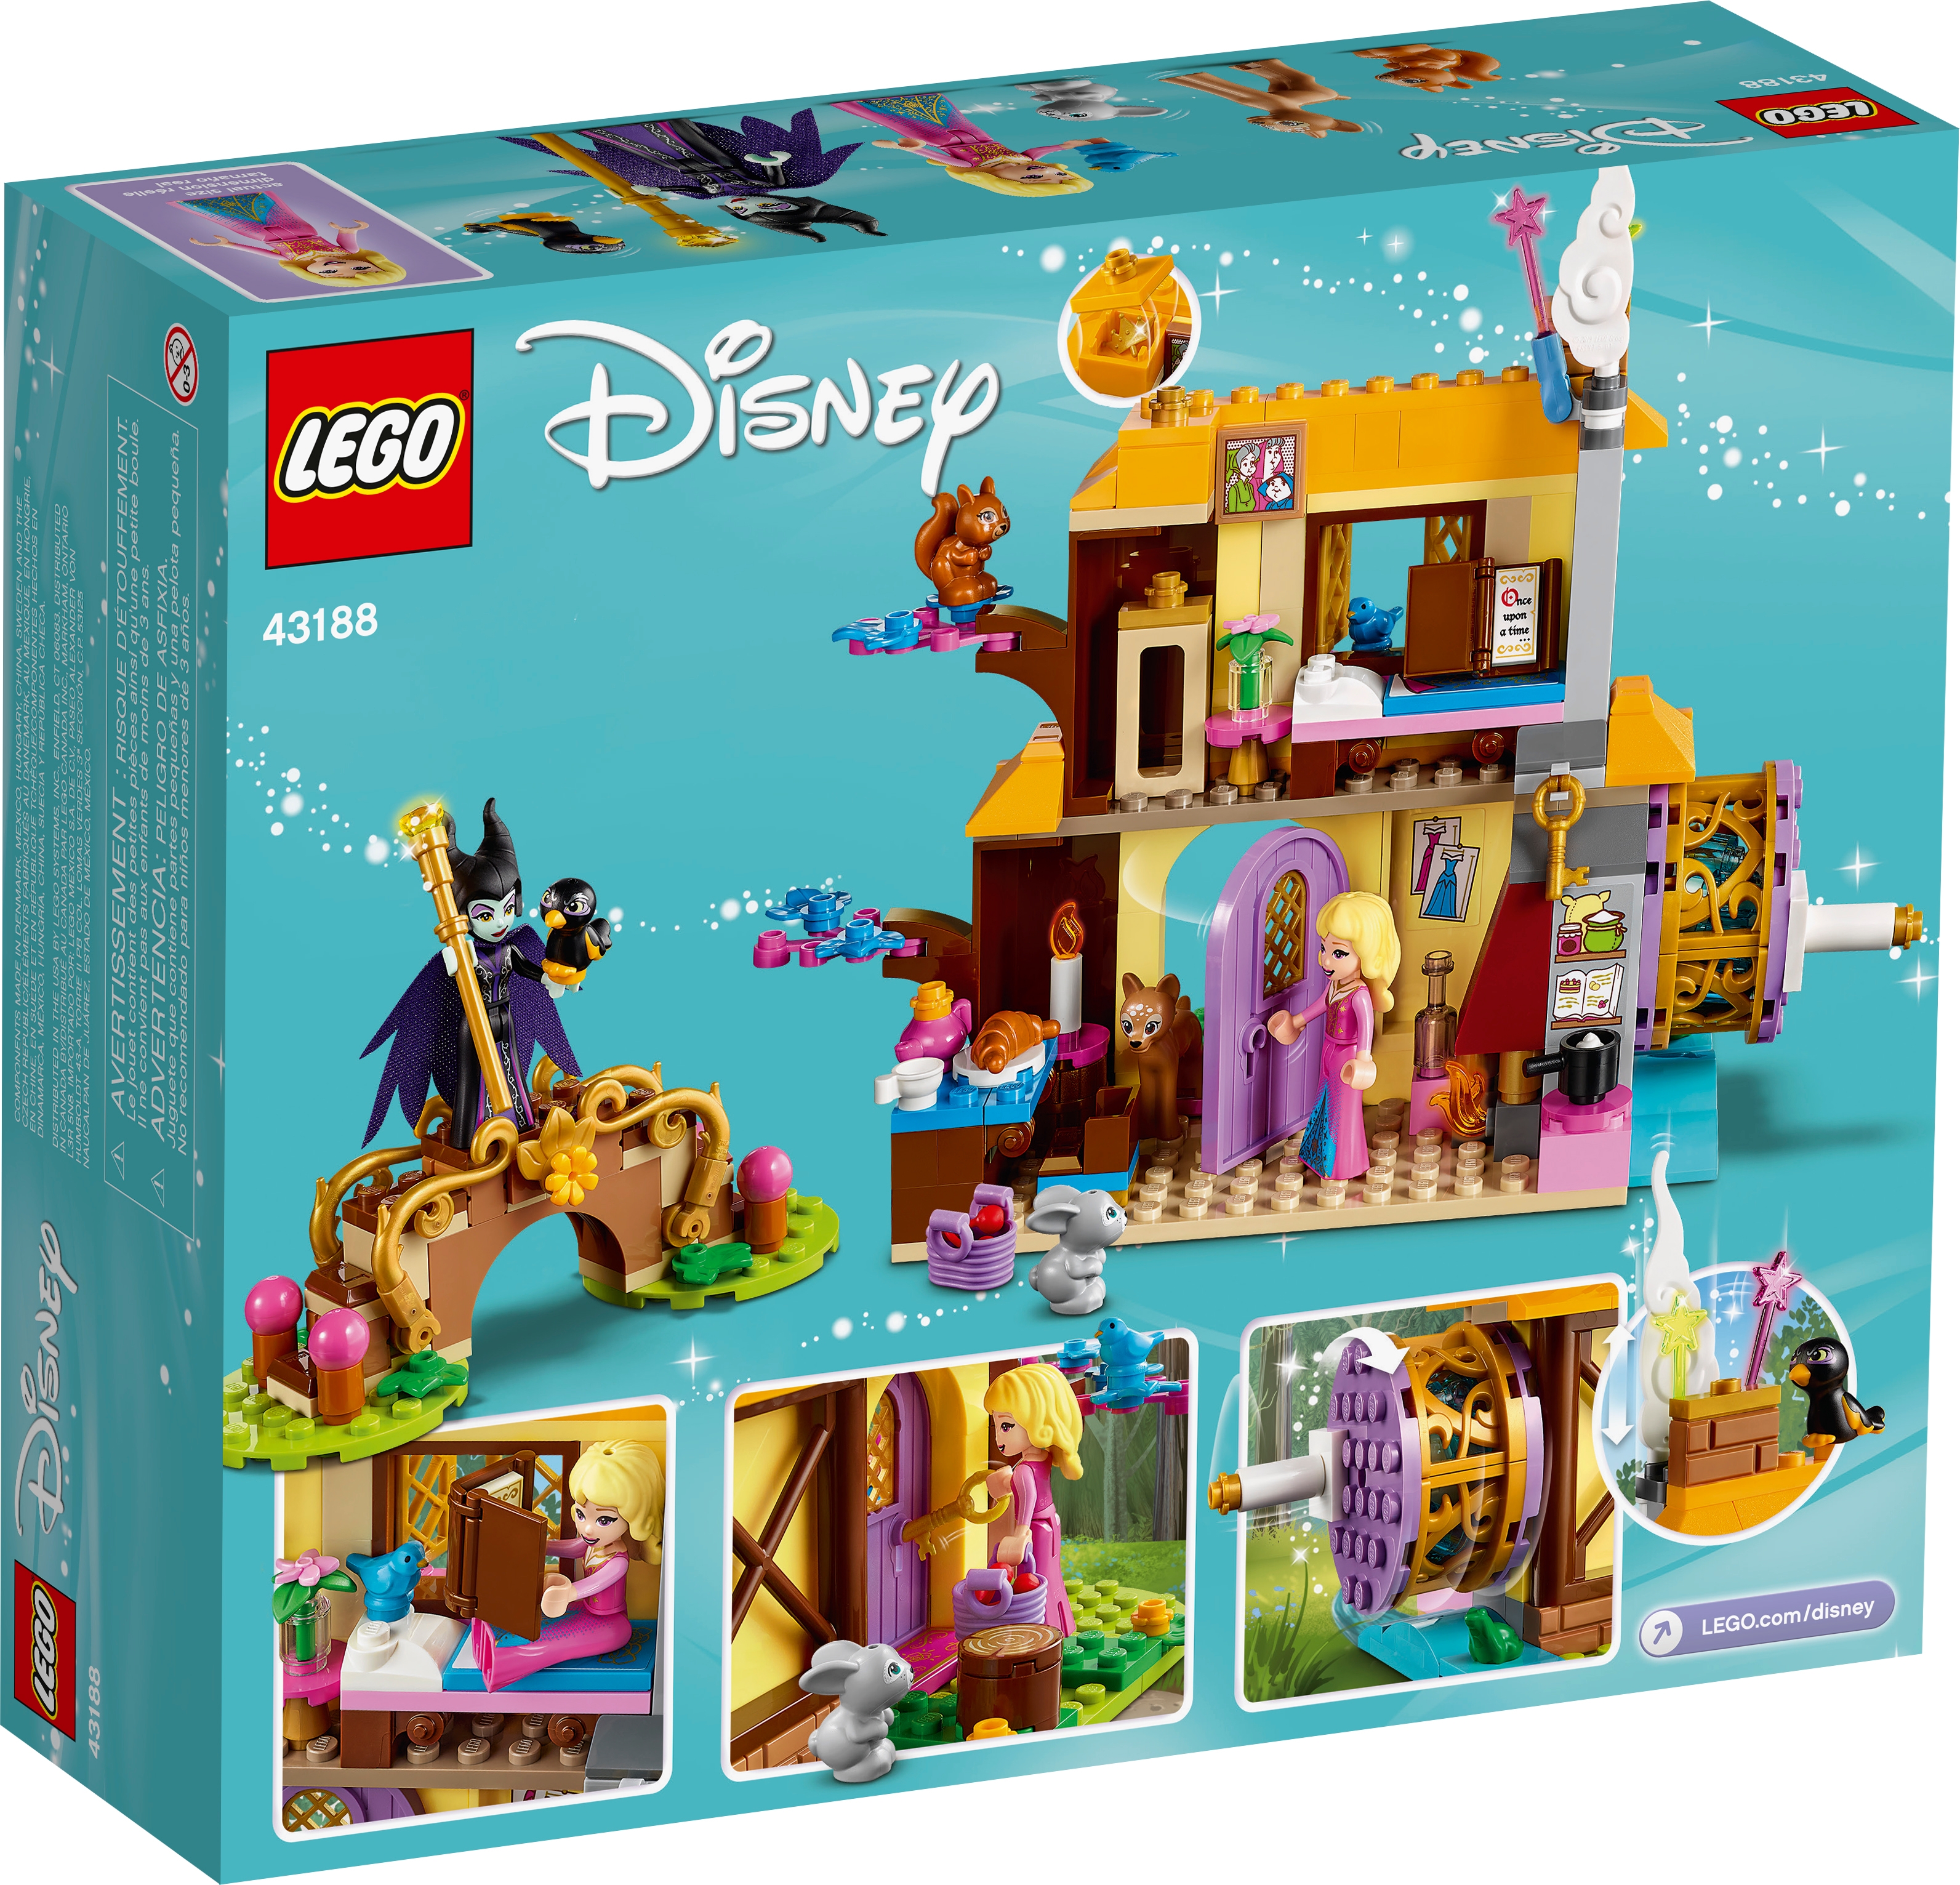 LEGO Disney Aurora’s Forest Cottage 43188 300 Pieces Sleeping Beauty Building Kit for Kids; A Fun Holiday Present or Birthday Gift for Disney Princess Fans New 2020 